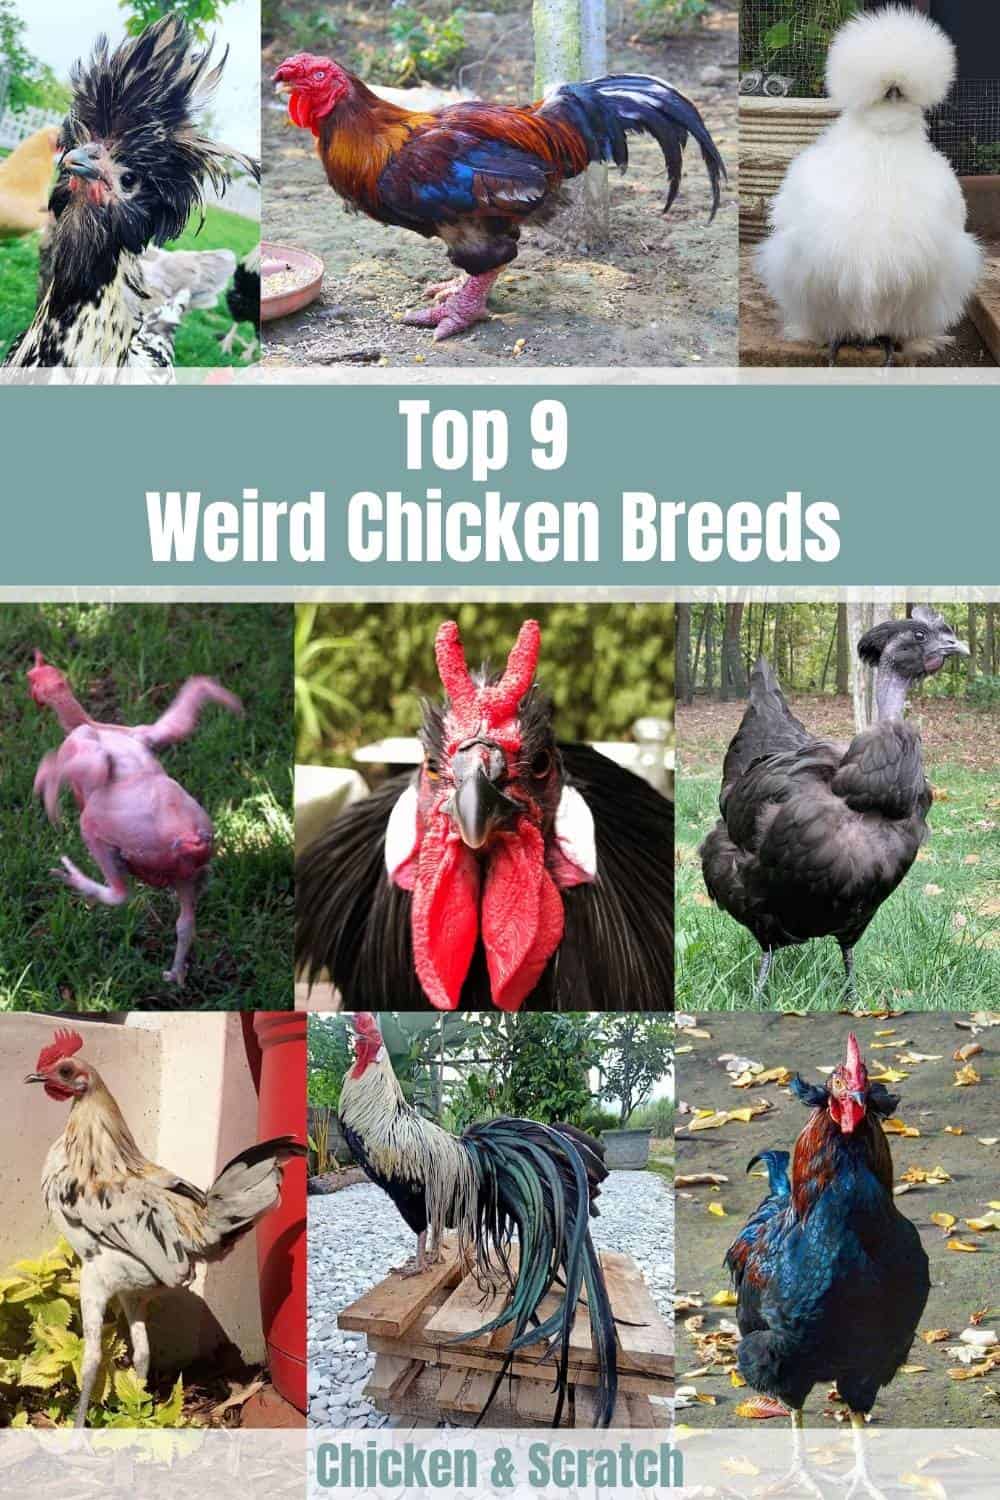 Top 9 Weird Chicken Breeds (with Pictures)